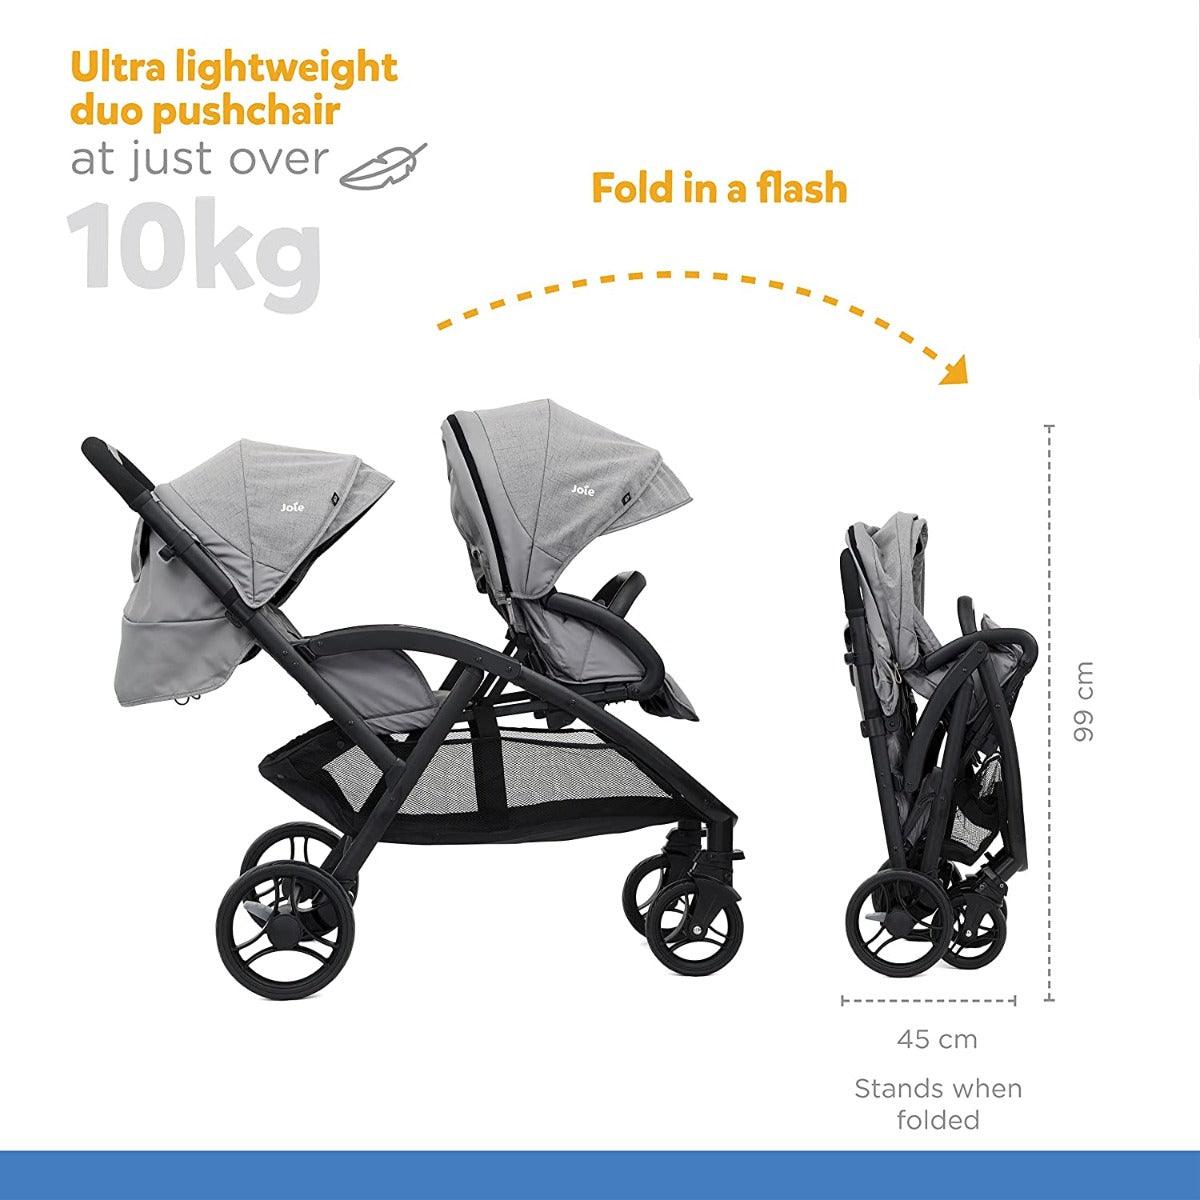 Joie Evalite Duo Baby Stroller - Double Baby Pram with Single Touch Brake for Ages 0-3 Years